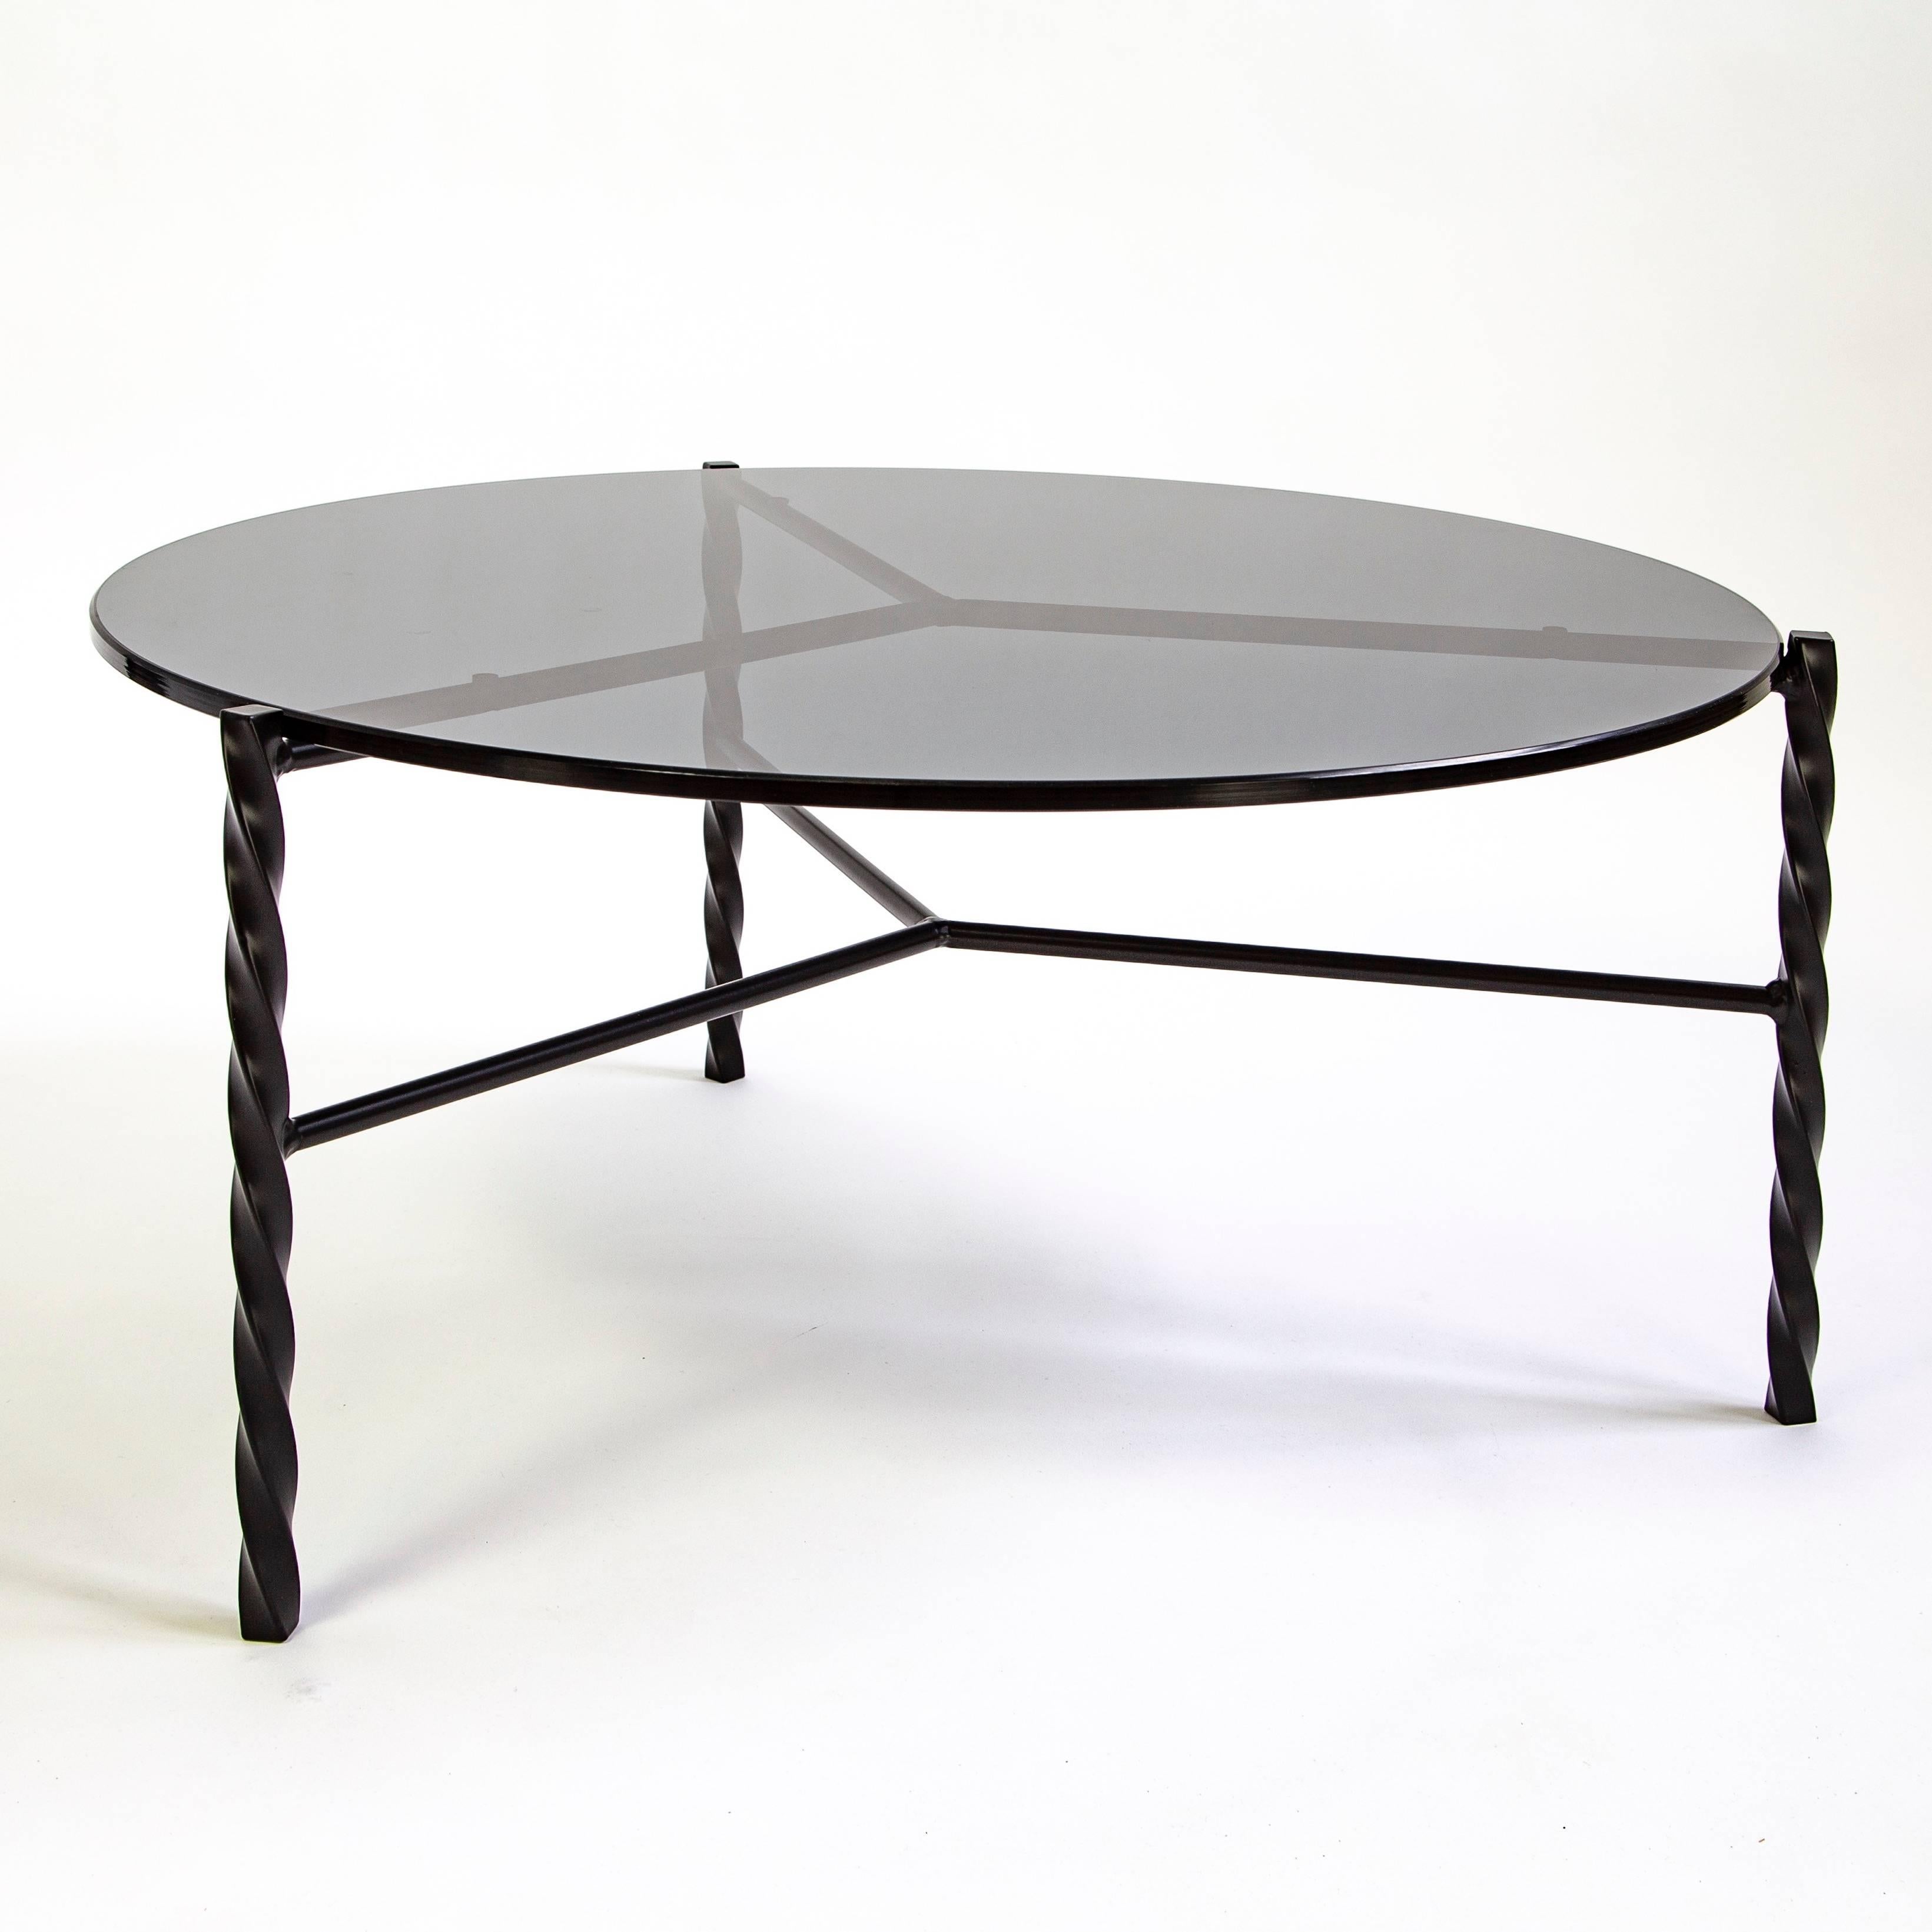 This piece is a floor model that was used at a trade show for a few days. It's in great condition with a few minor scratches .

The Von Iron series consists of coffee and side tables with a distinctive twist. Inspired by traditional blacksmith